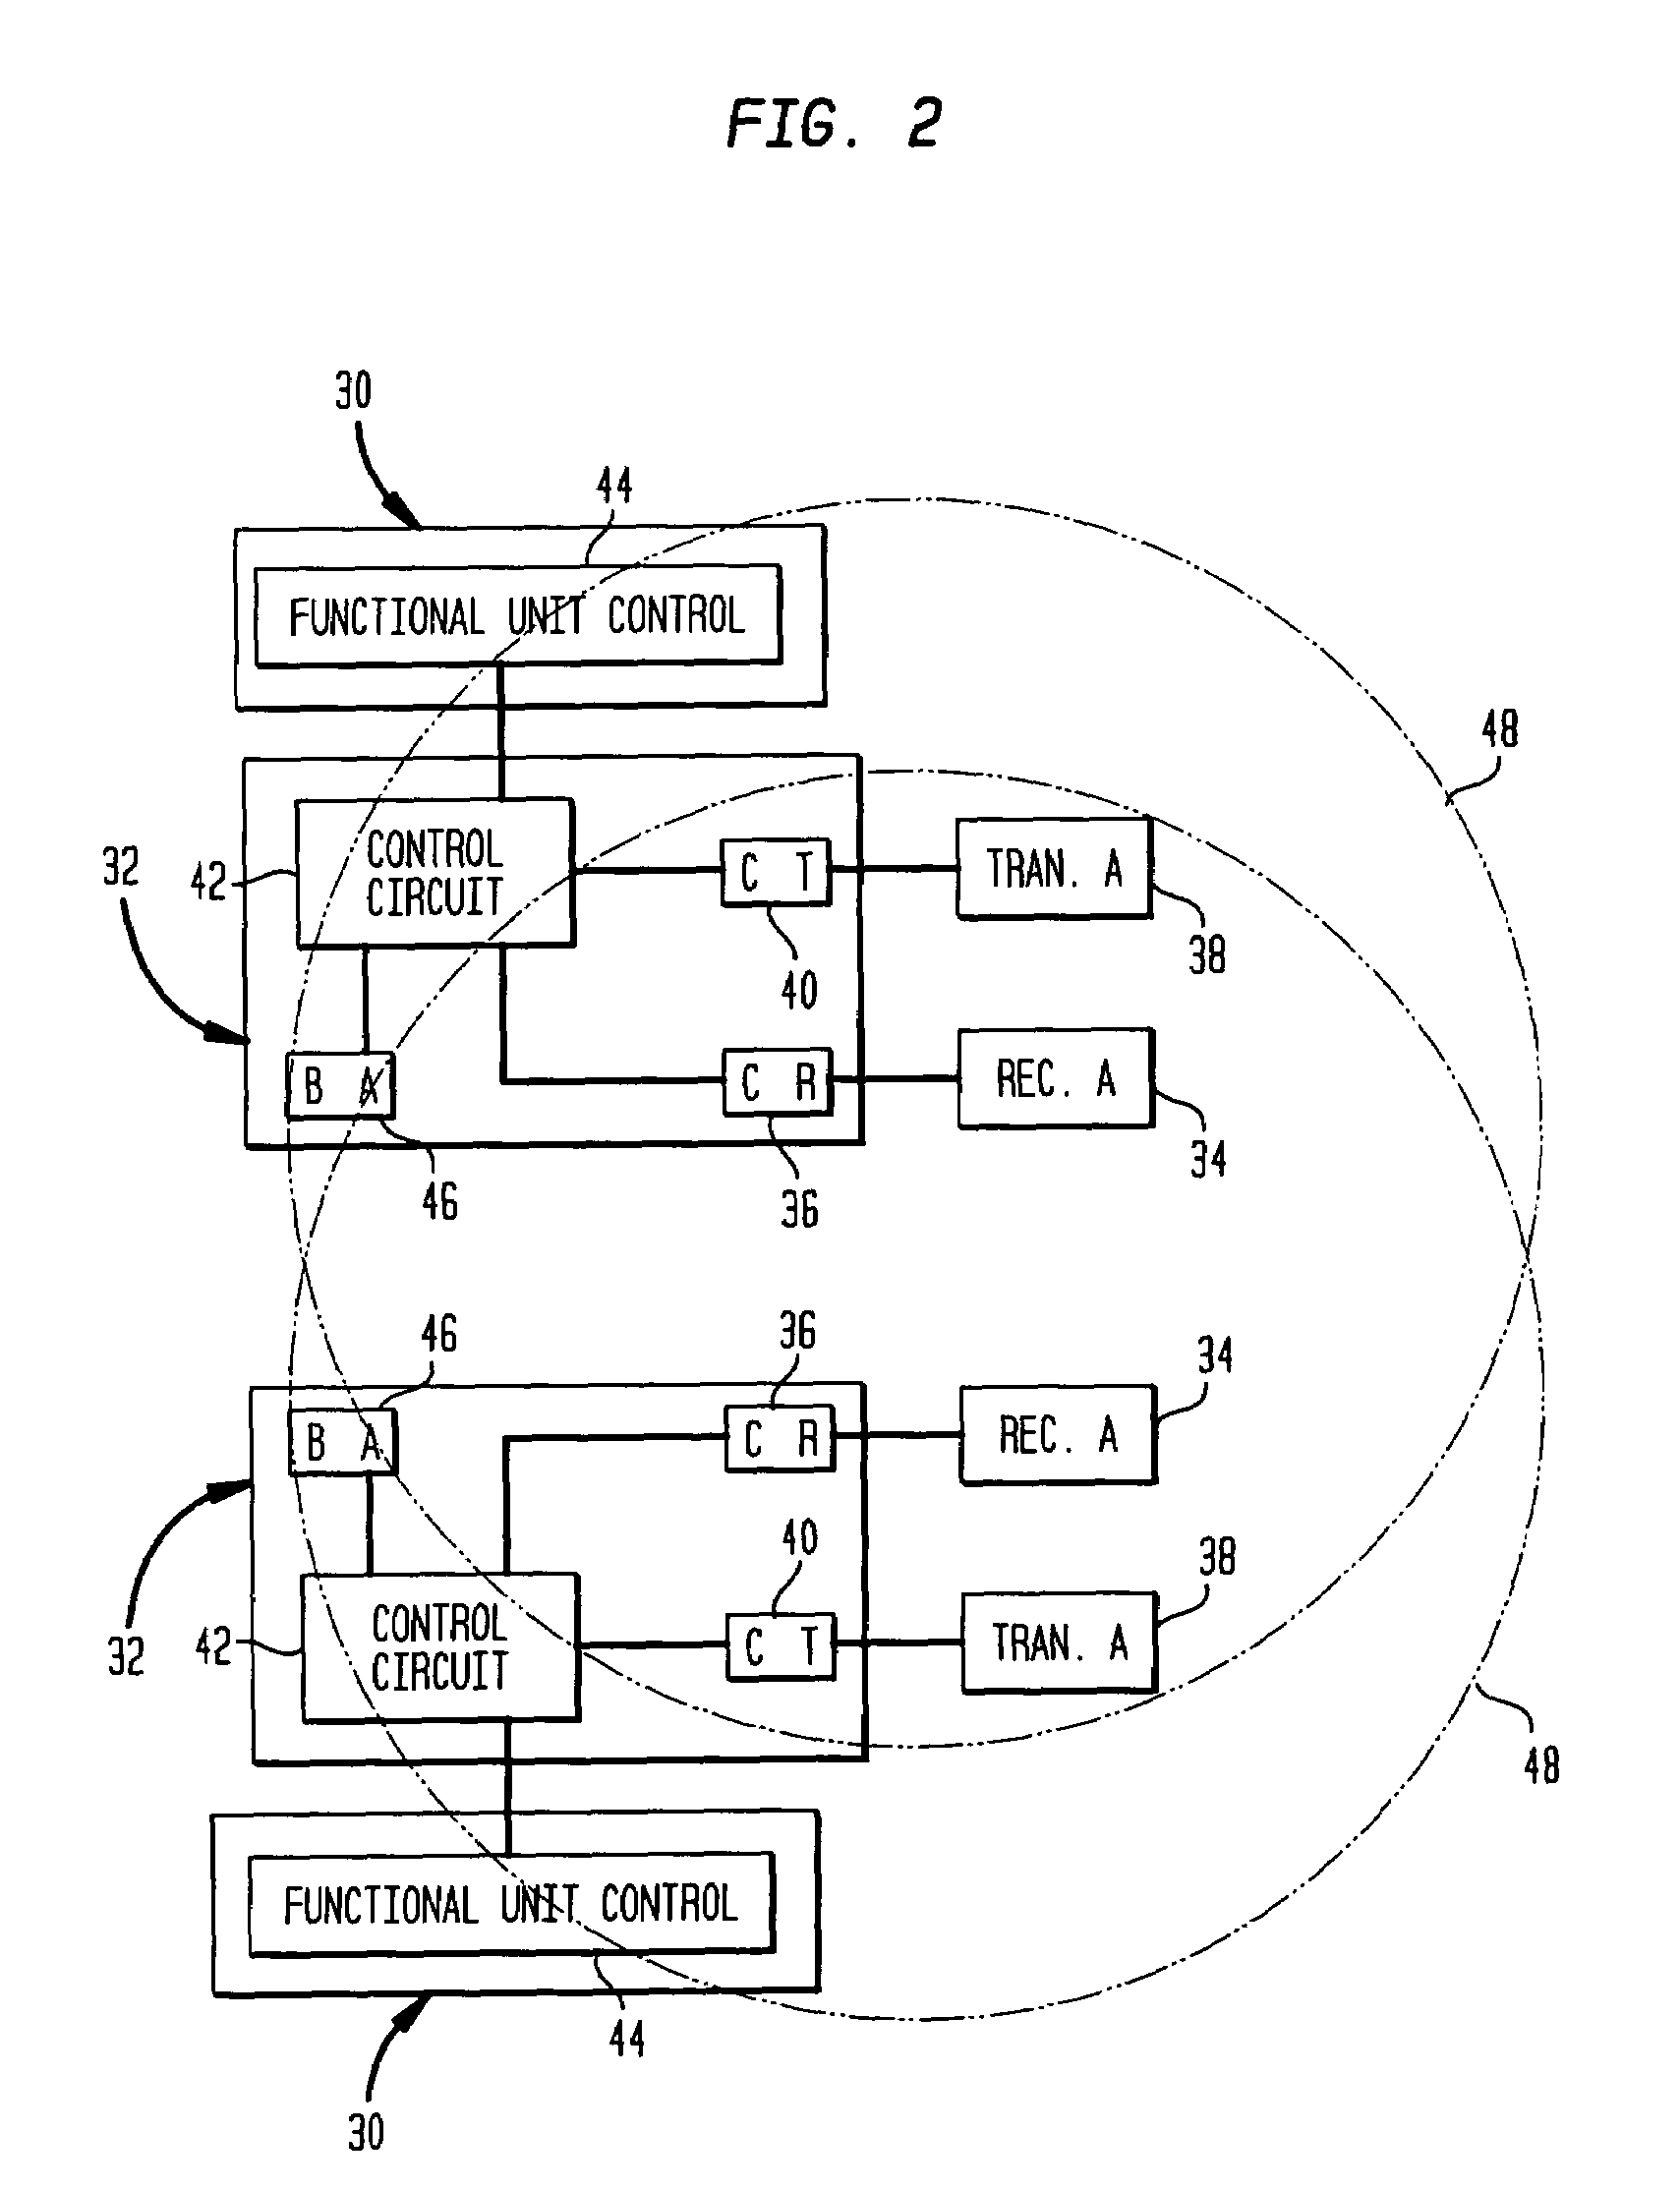 Method and apparatus for pairing and configuring wireless devices